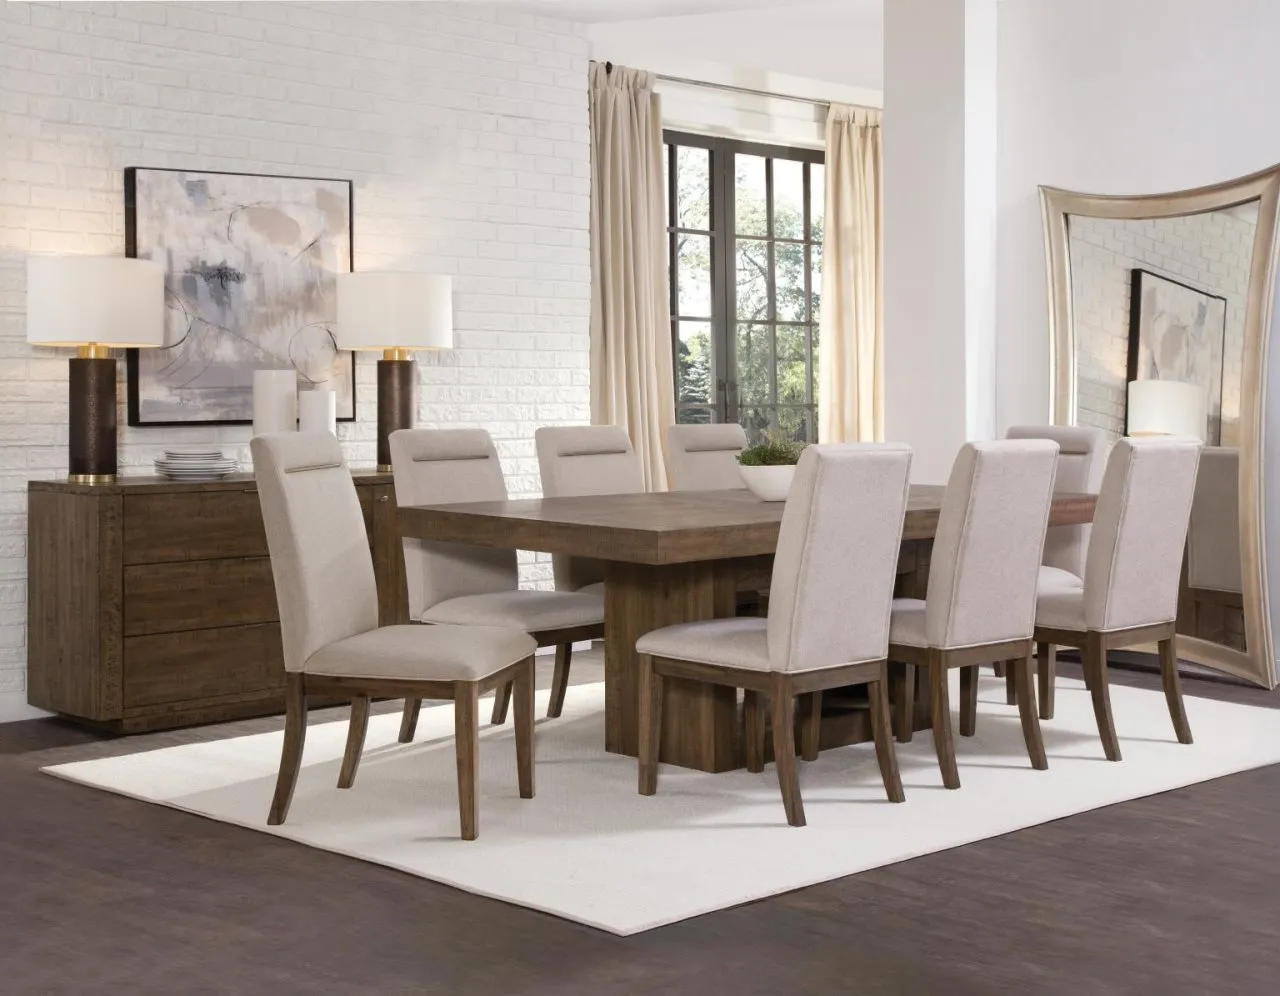 5 PIECE GARLAND TABLE + 4 SIDE CHAIRS